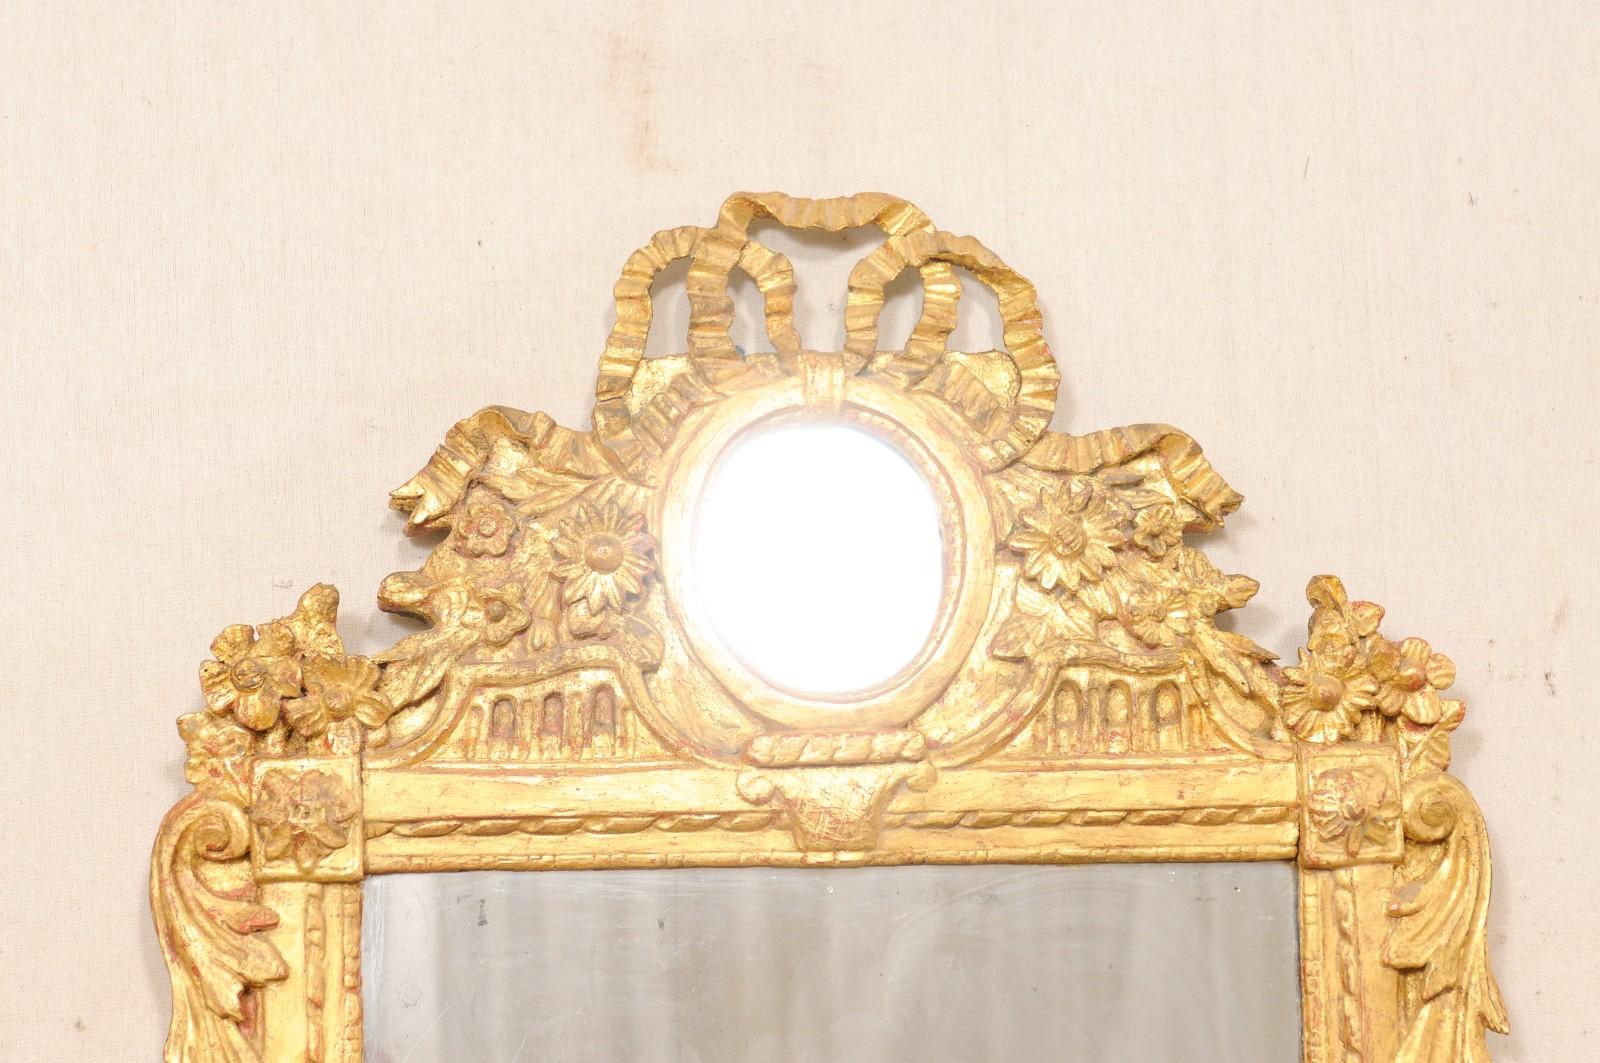 Giltwood Neoclassic French Carved & Gilt Wood Mirror with Bow-Tie & Mirror Crest, 19th C.